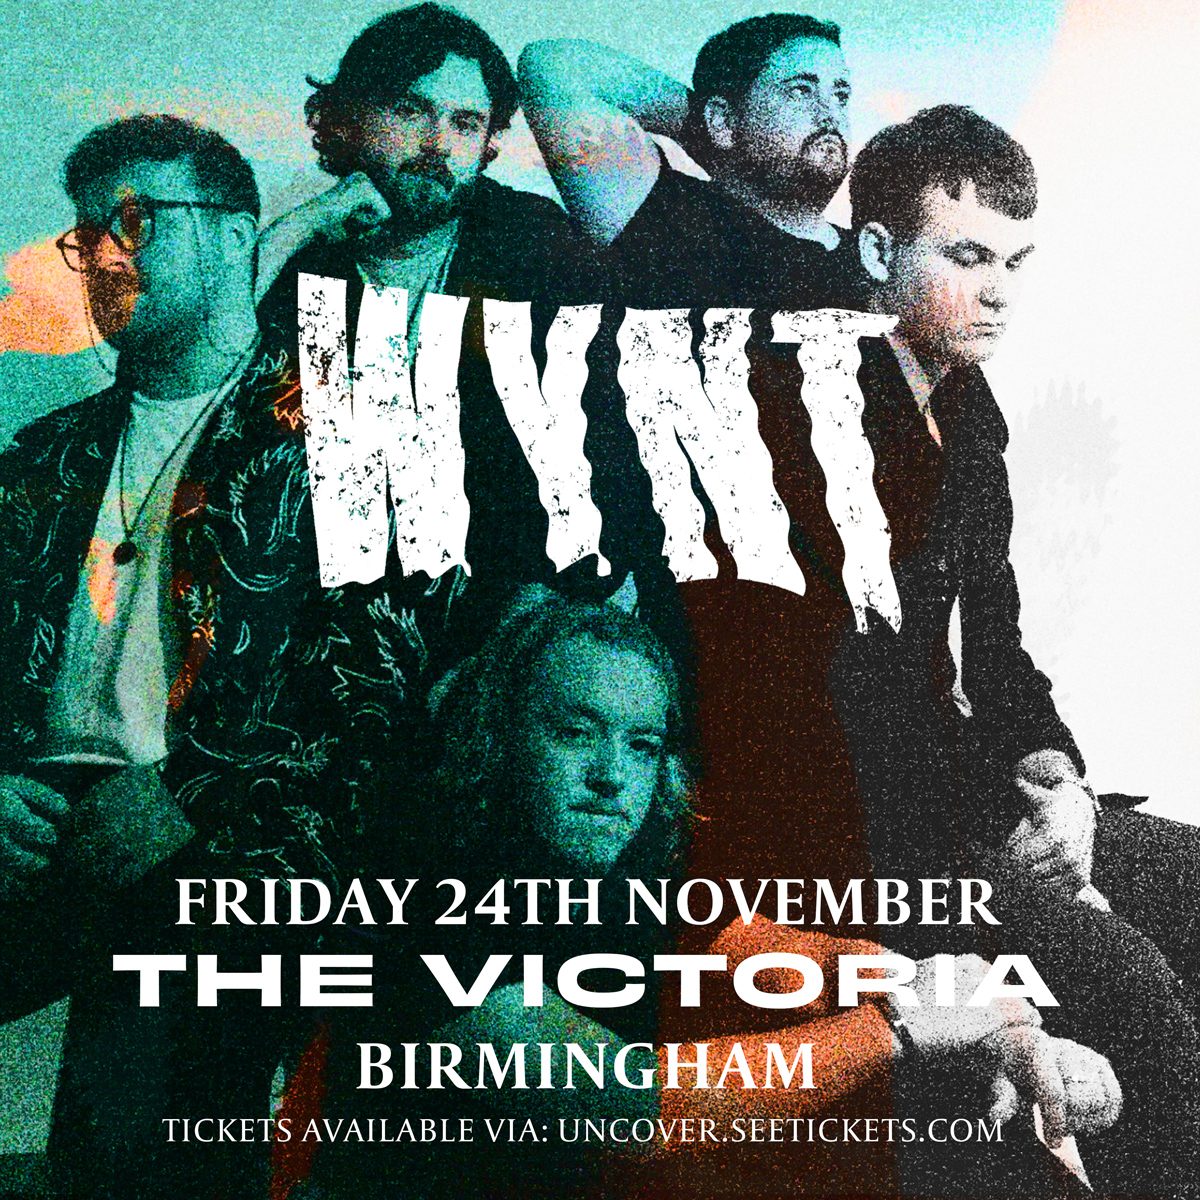 NEXT MONTH 💙 Ear-shattering Welsh 5-piece @Wyntband headline @TheVictoria, Birmingham, on Friday, 24th November 💥 Tickets on sale now: bit.ly/48D9Src